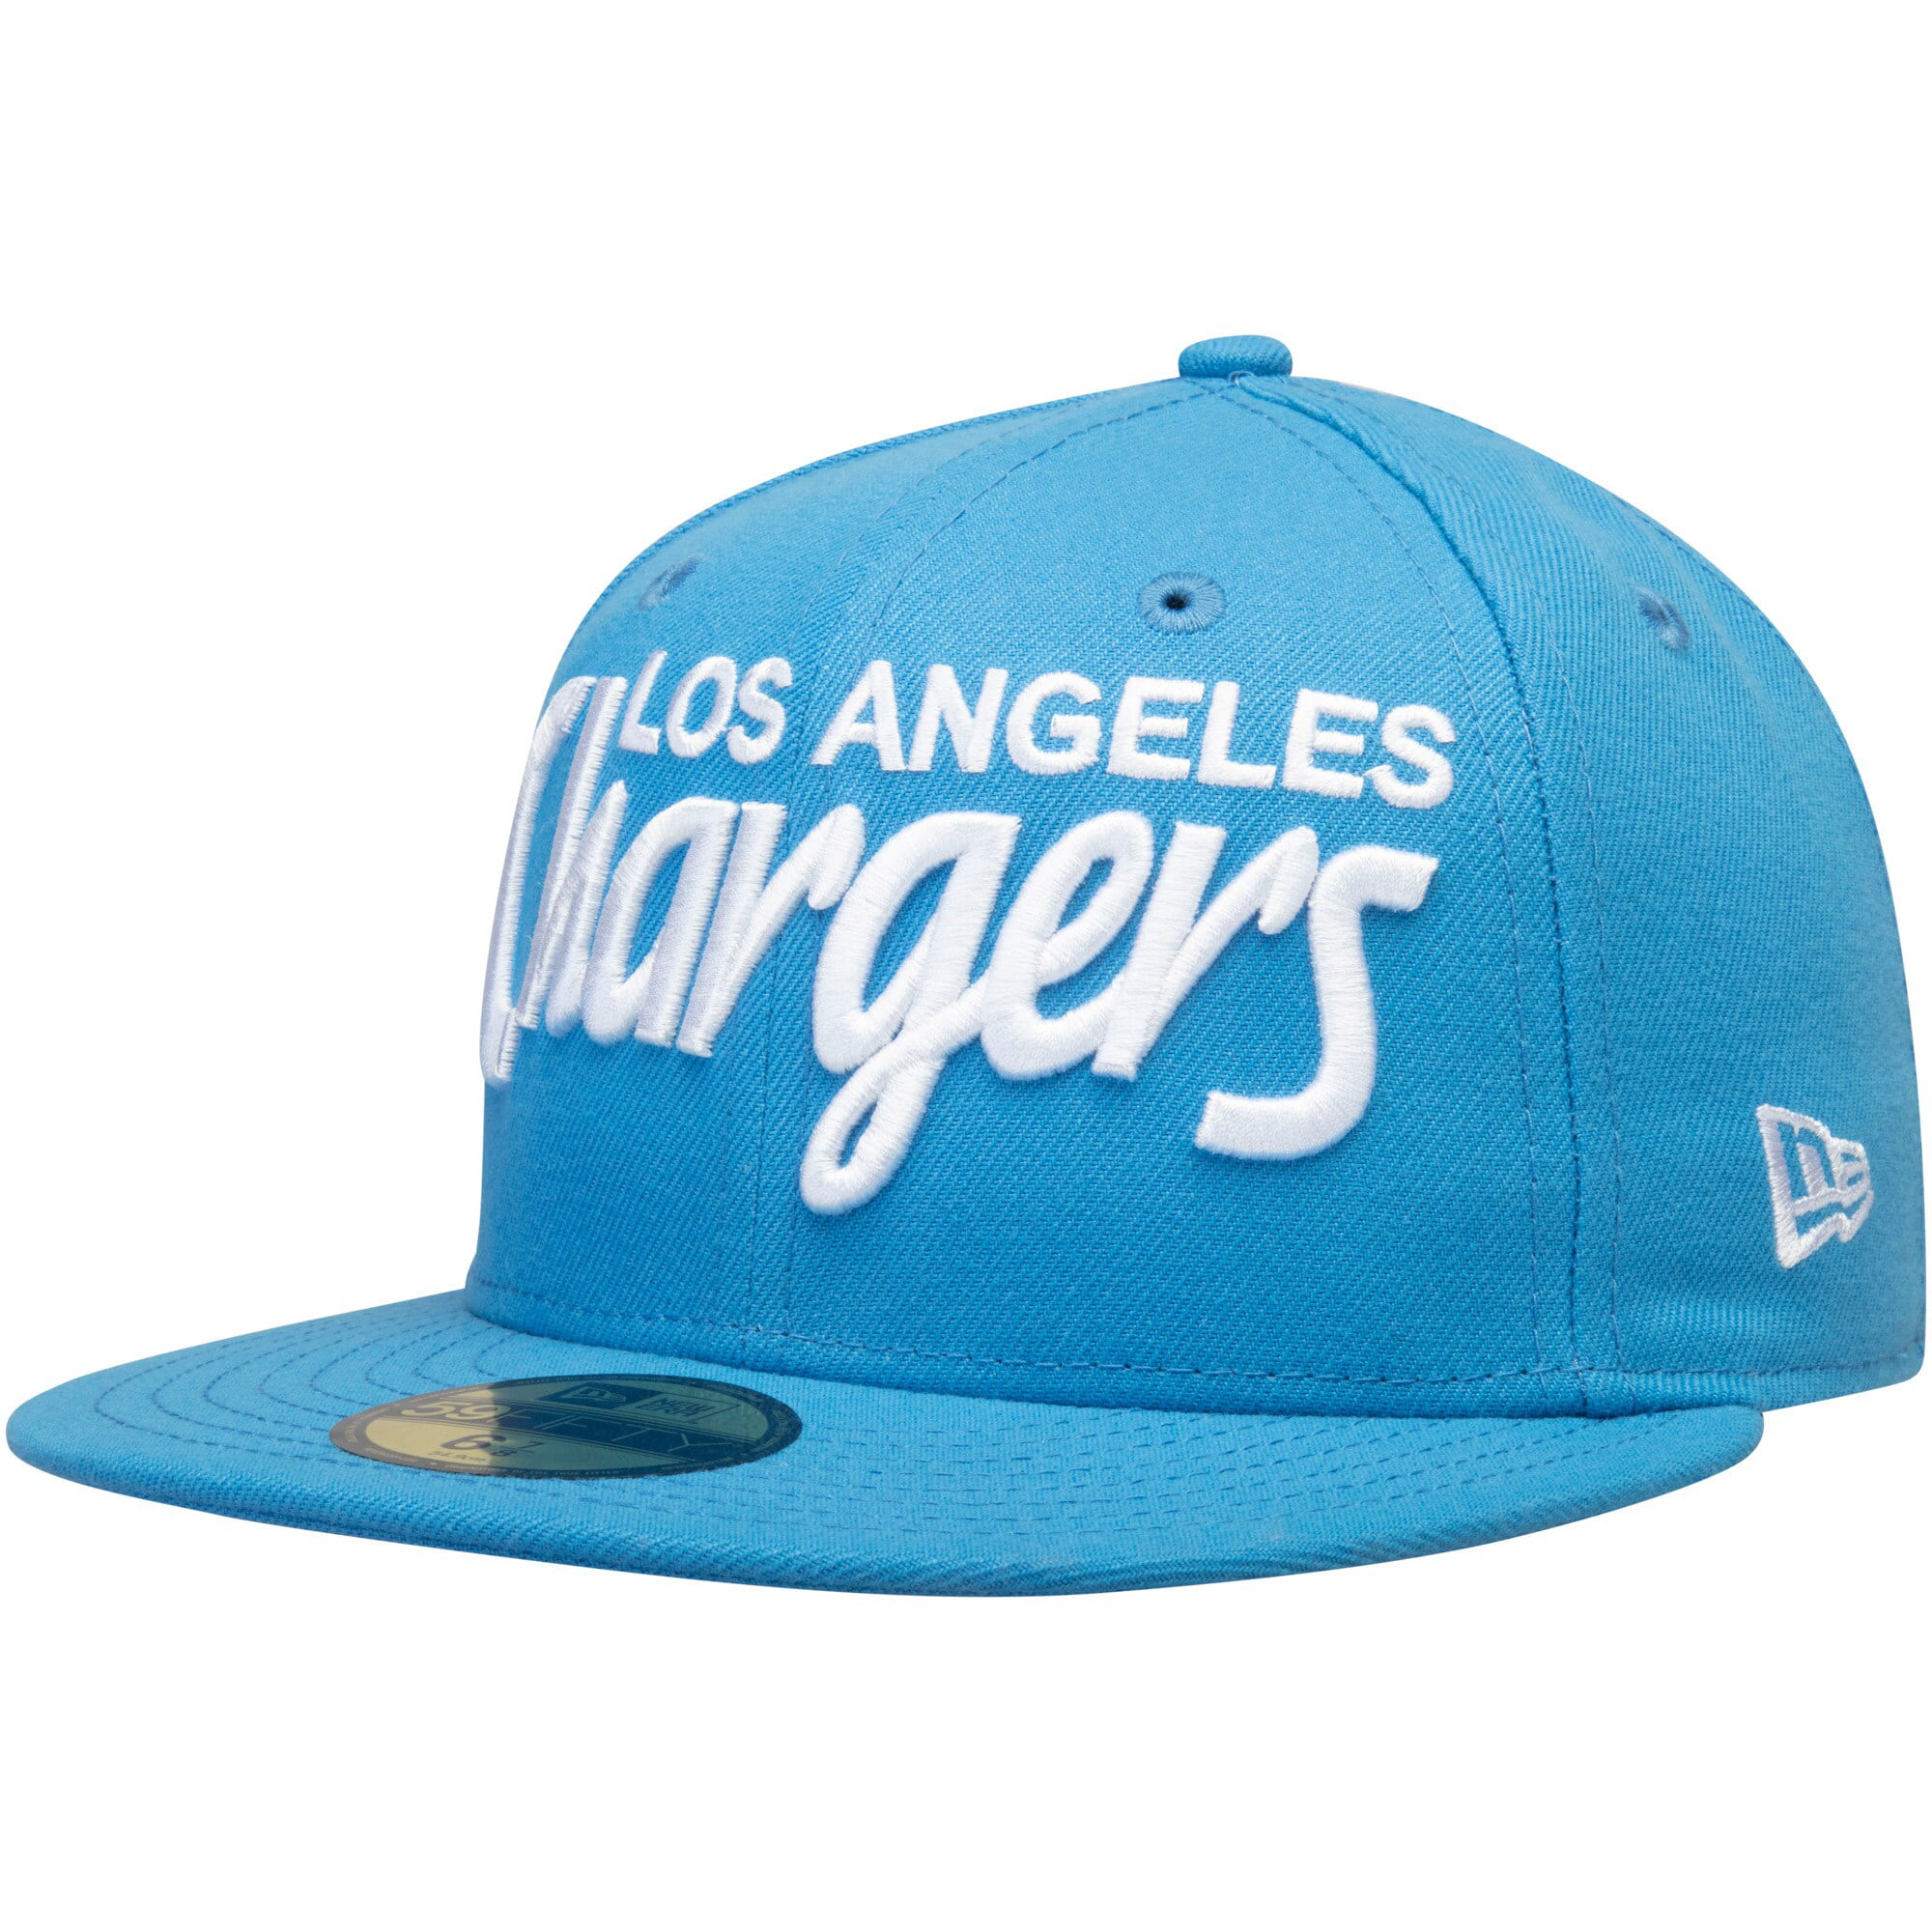 chargers powder blue hat